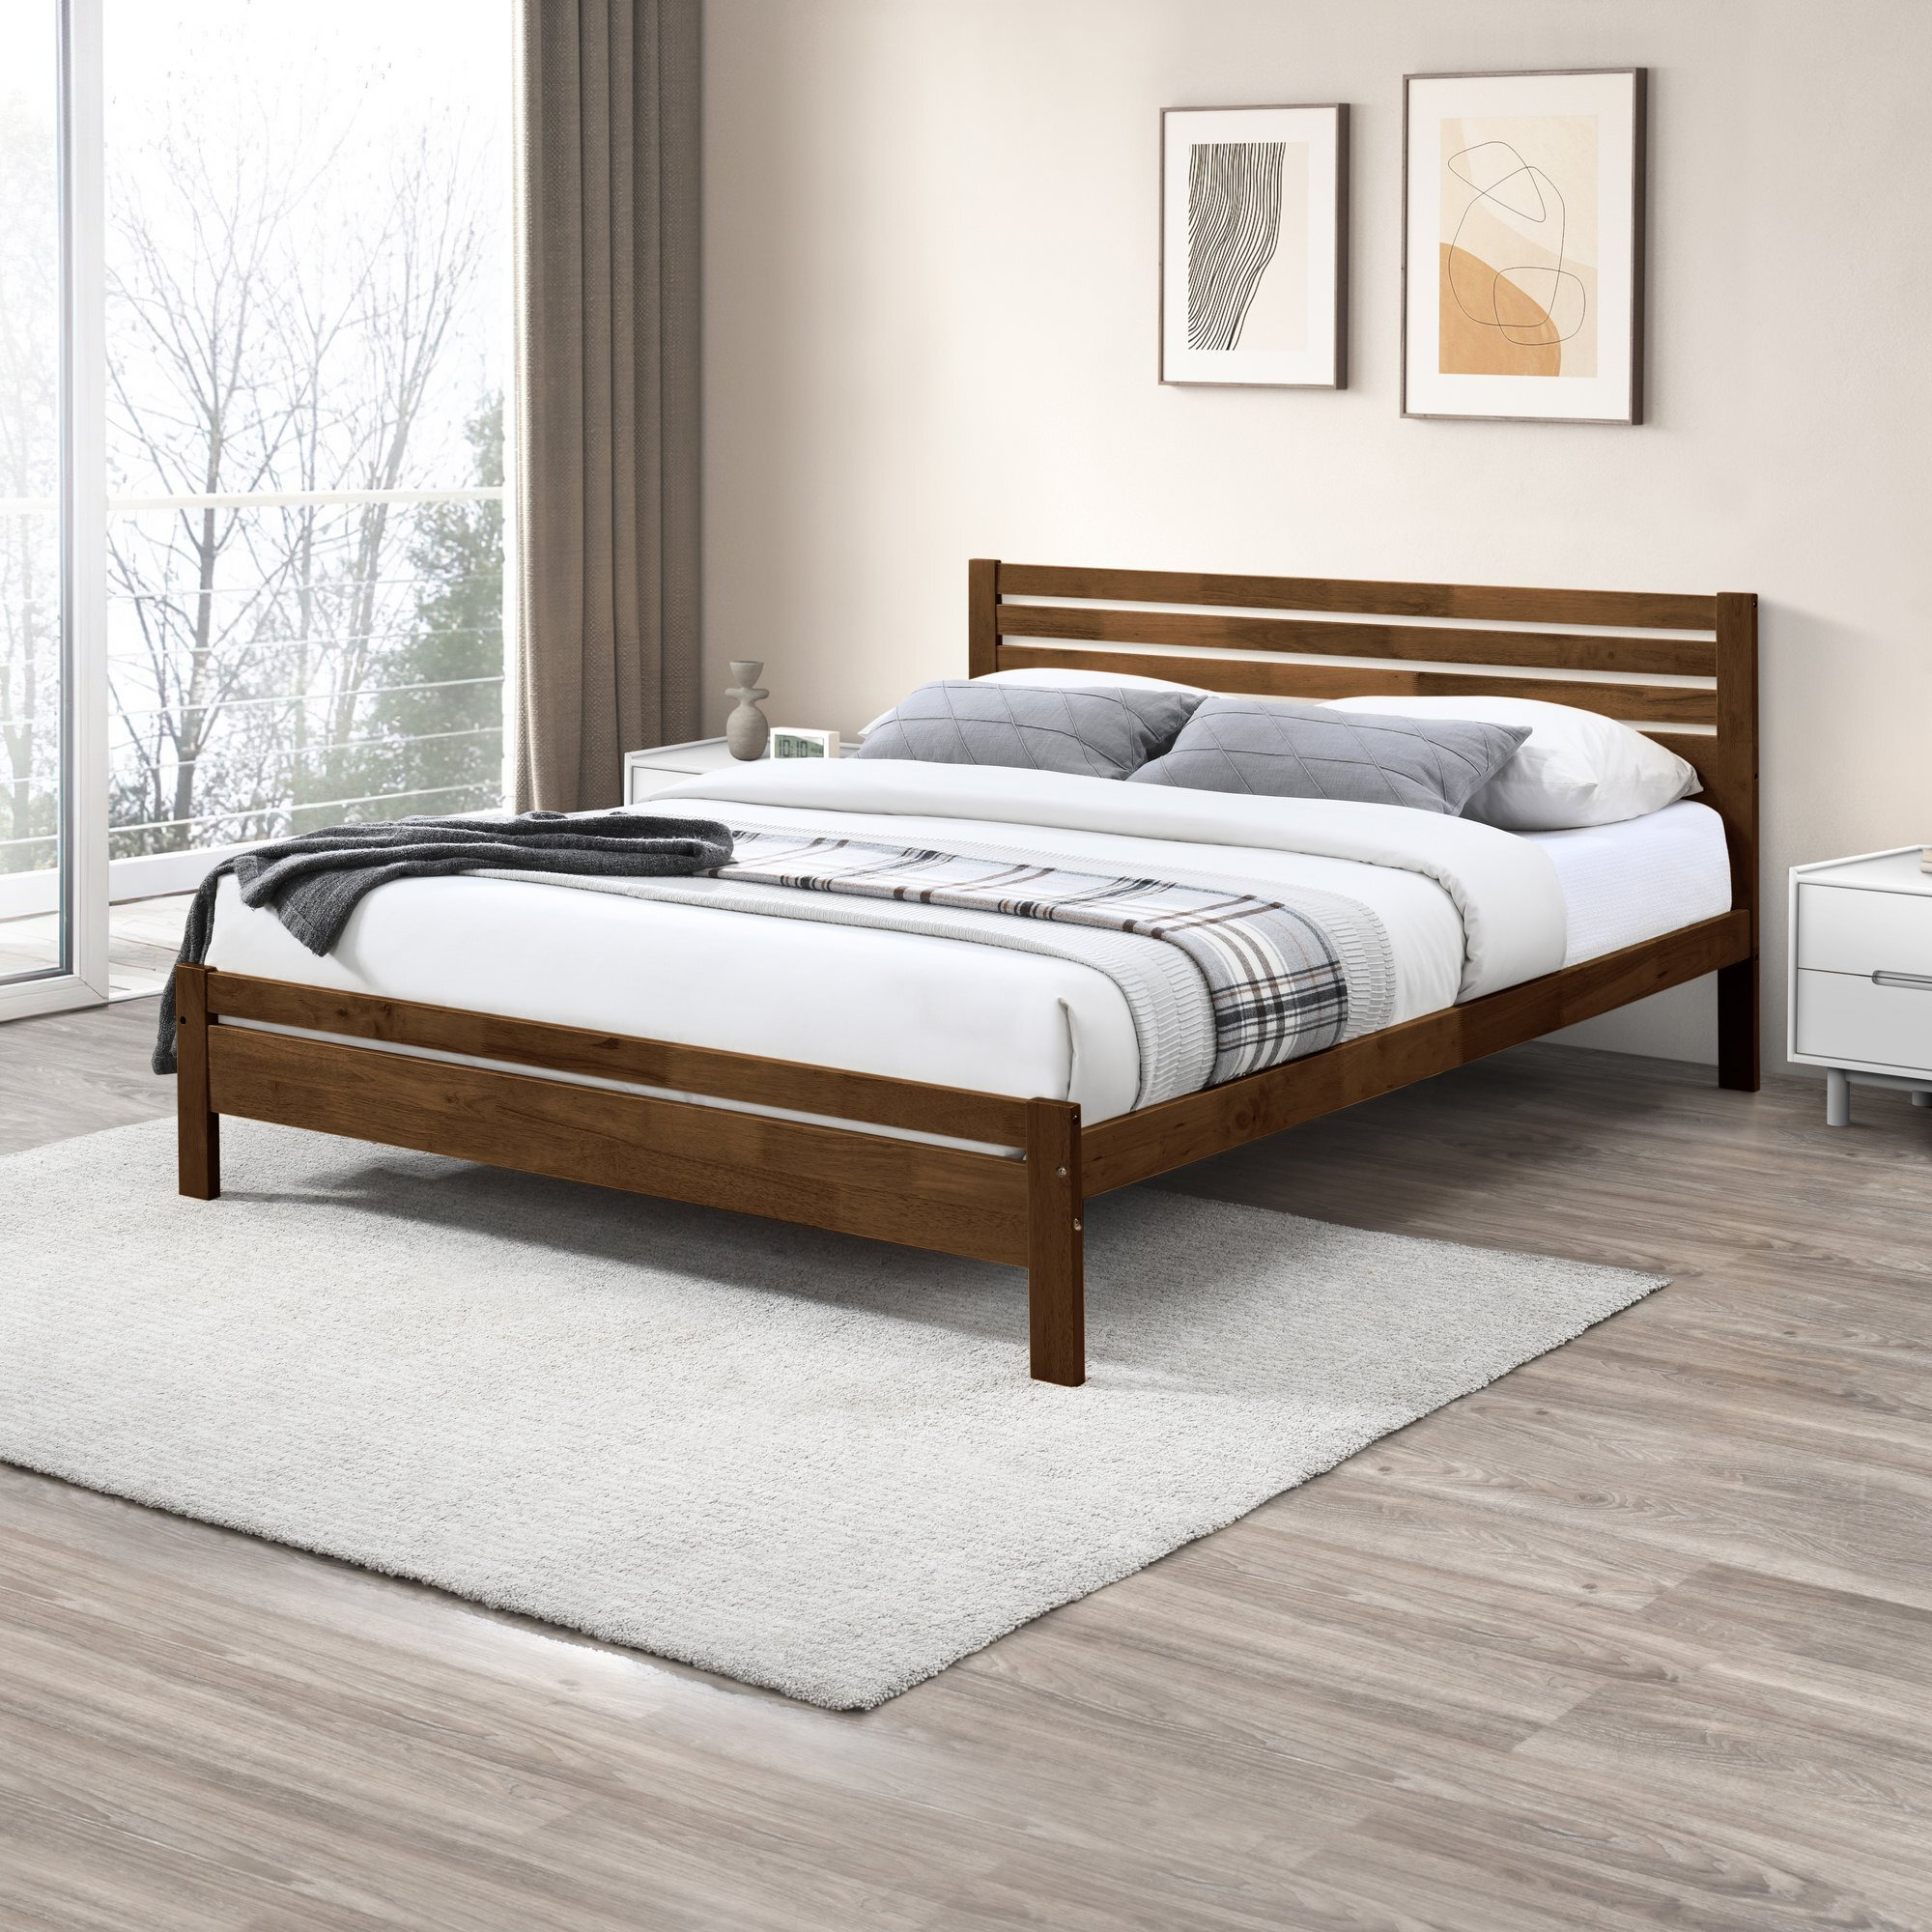 Dylan Solid Wood Bed Frame in Walnut Finish